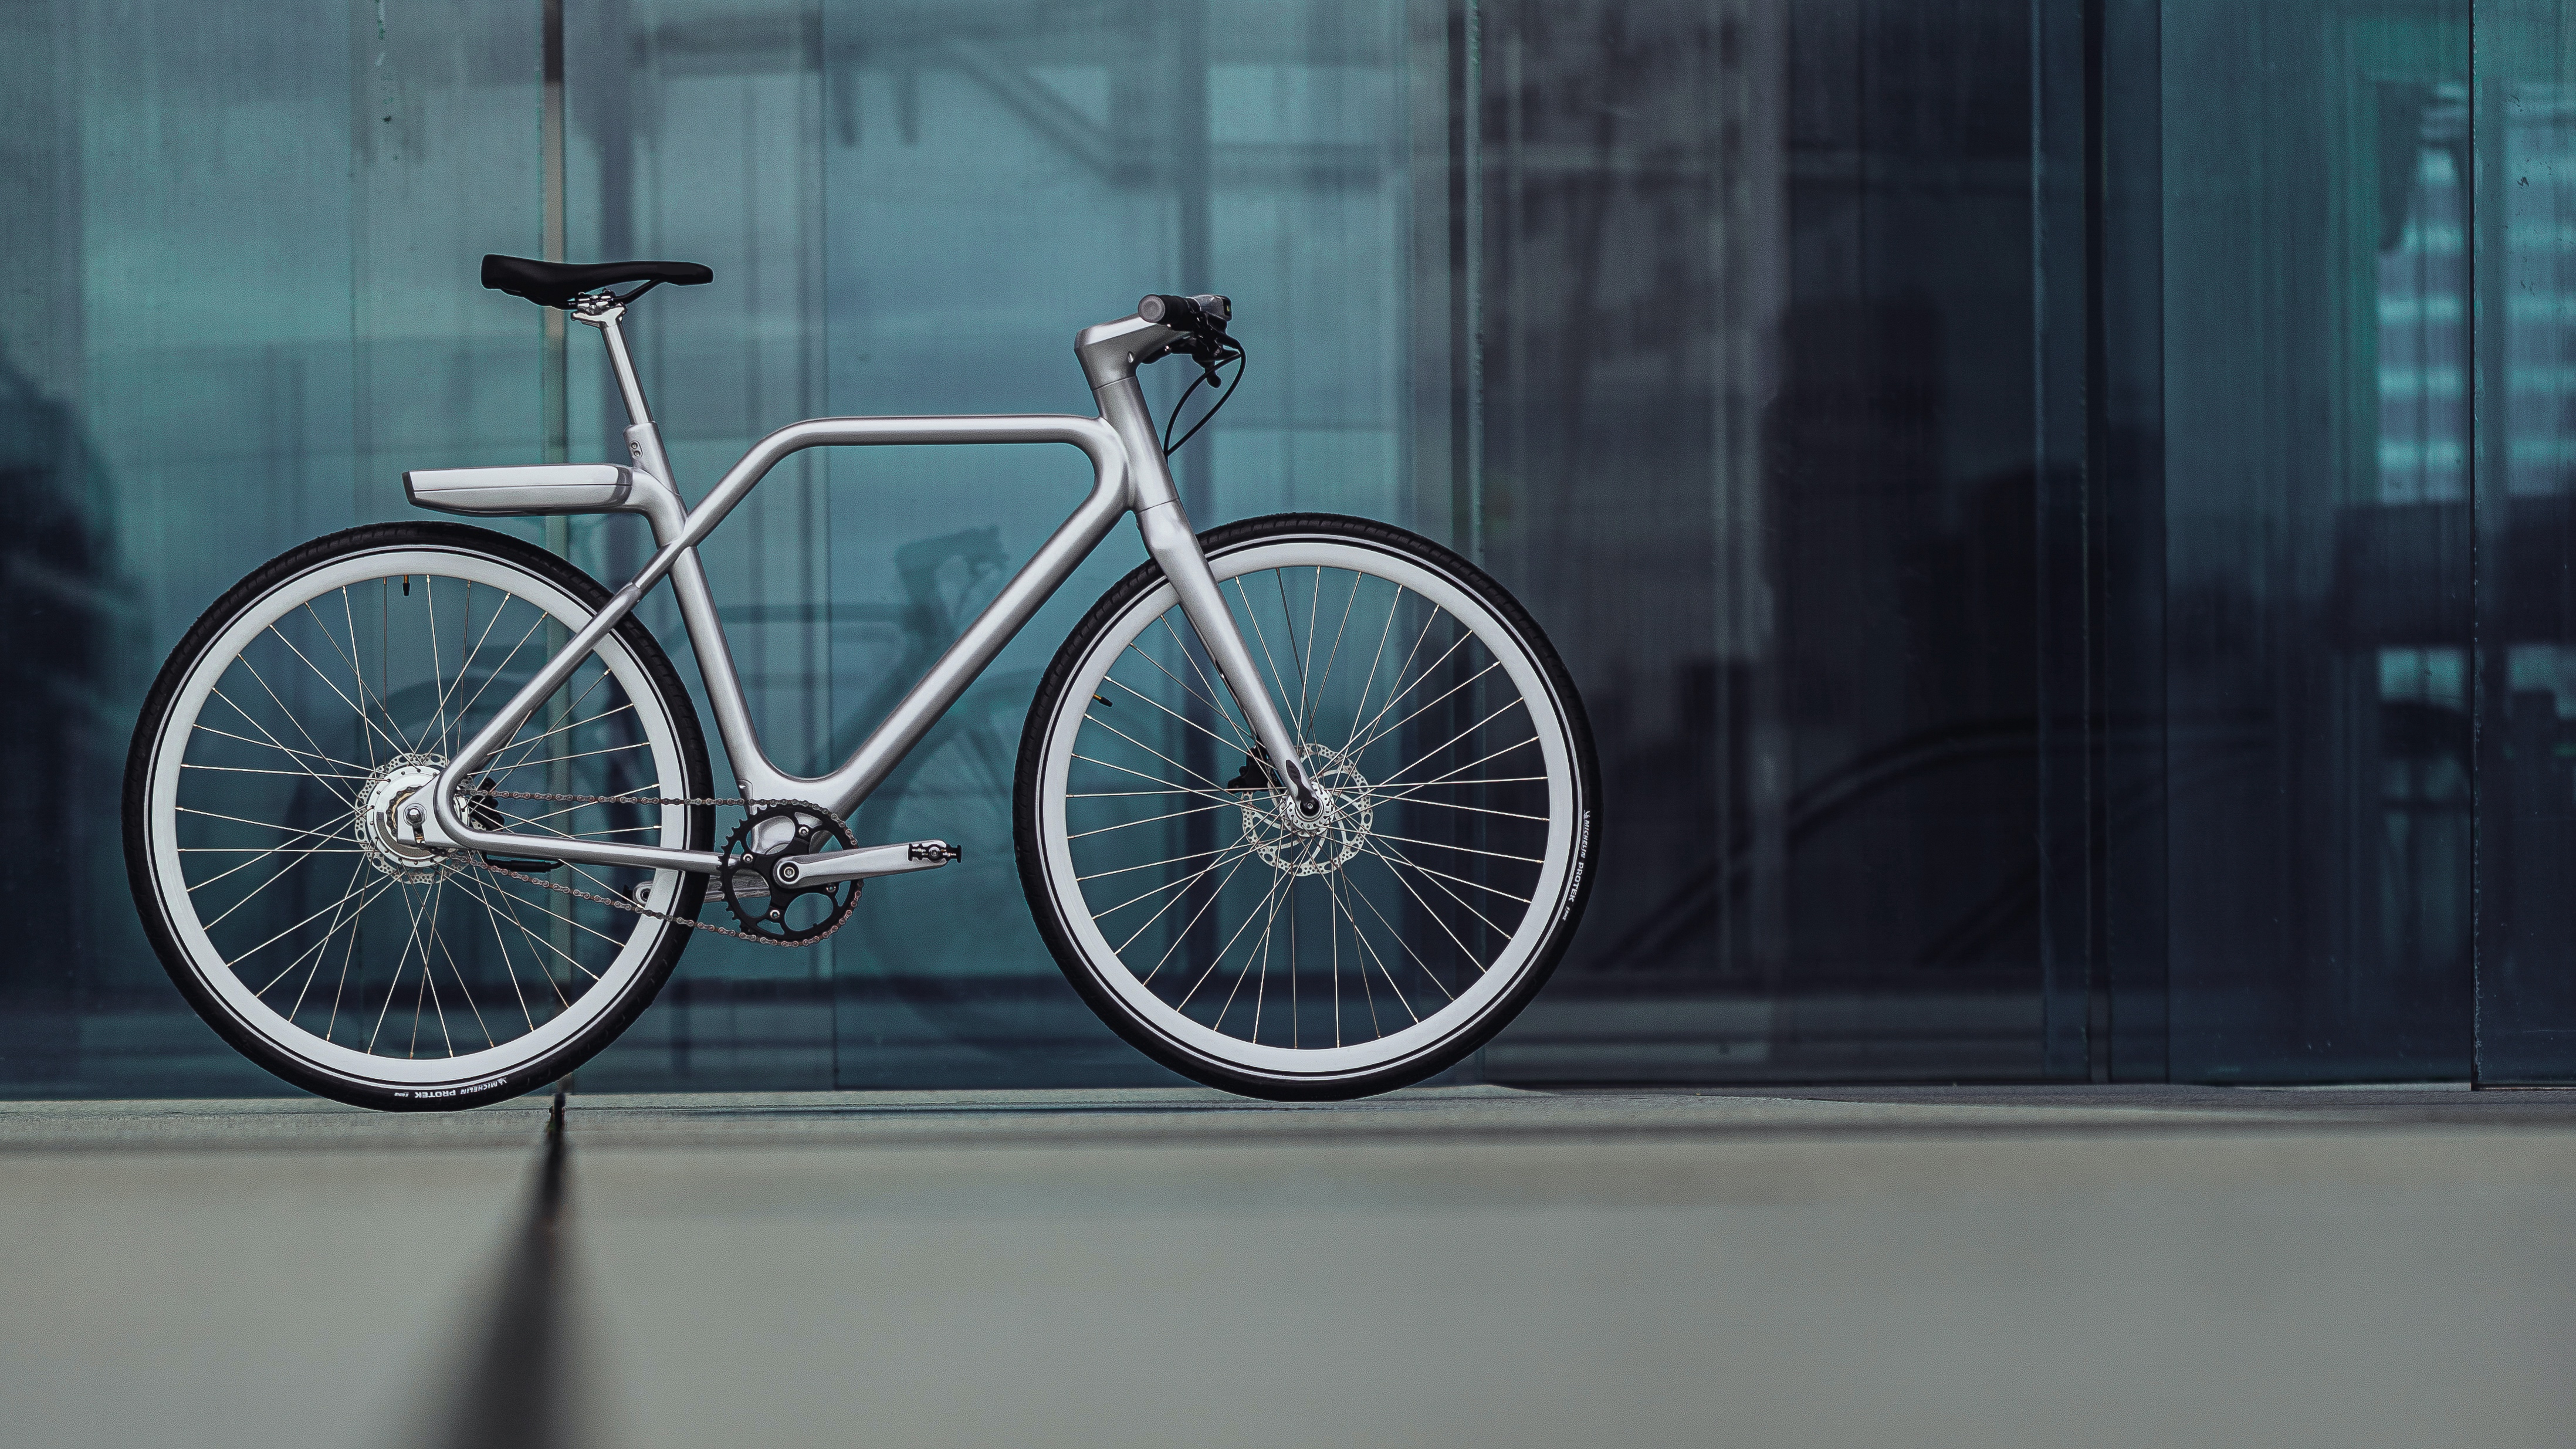 Angell is a smart bike with an integrated display